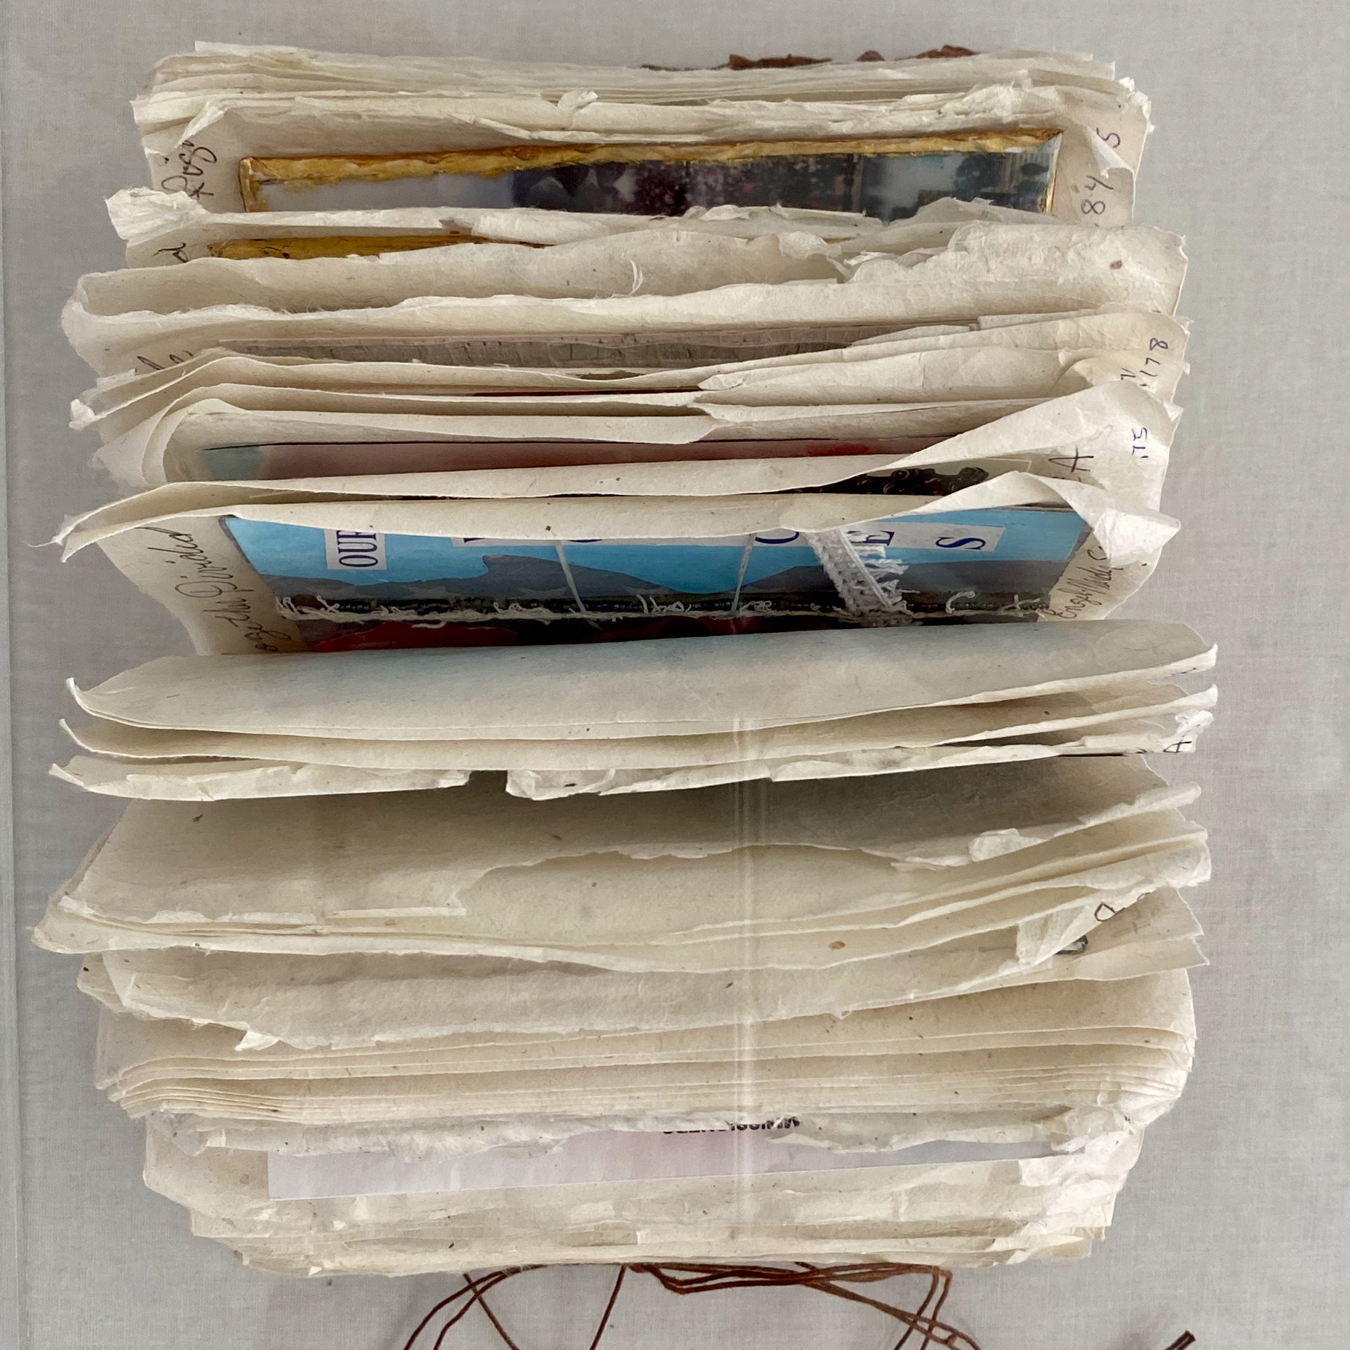 She Votes, altered book